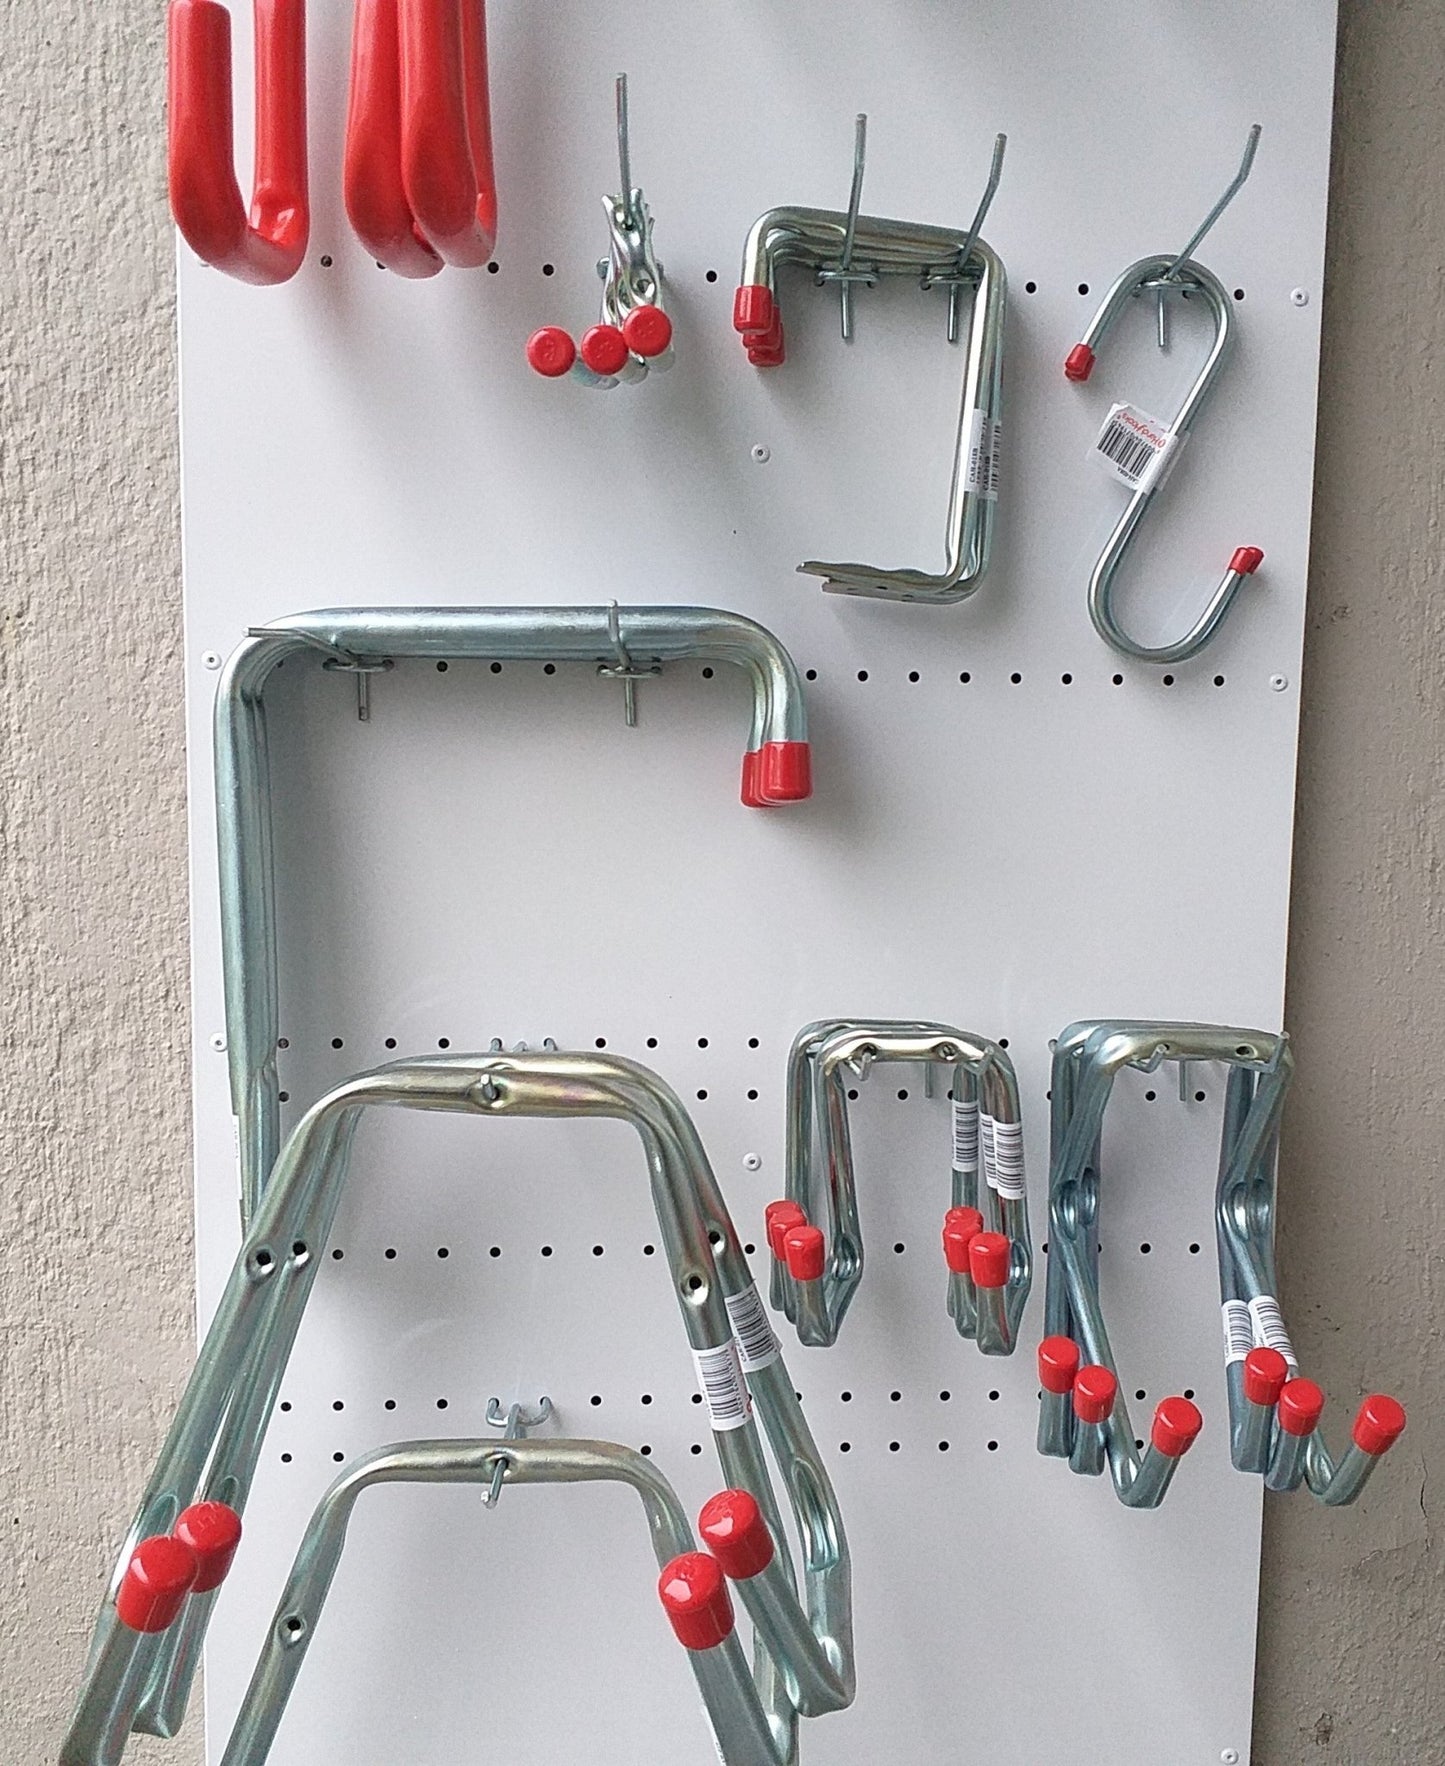 Handy Hooks - Double Wall Brace - The easy to install storage solution - Lifespace